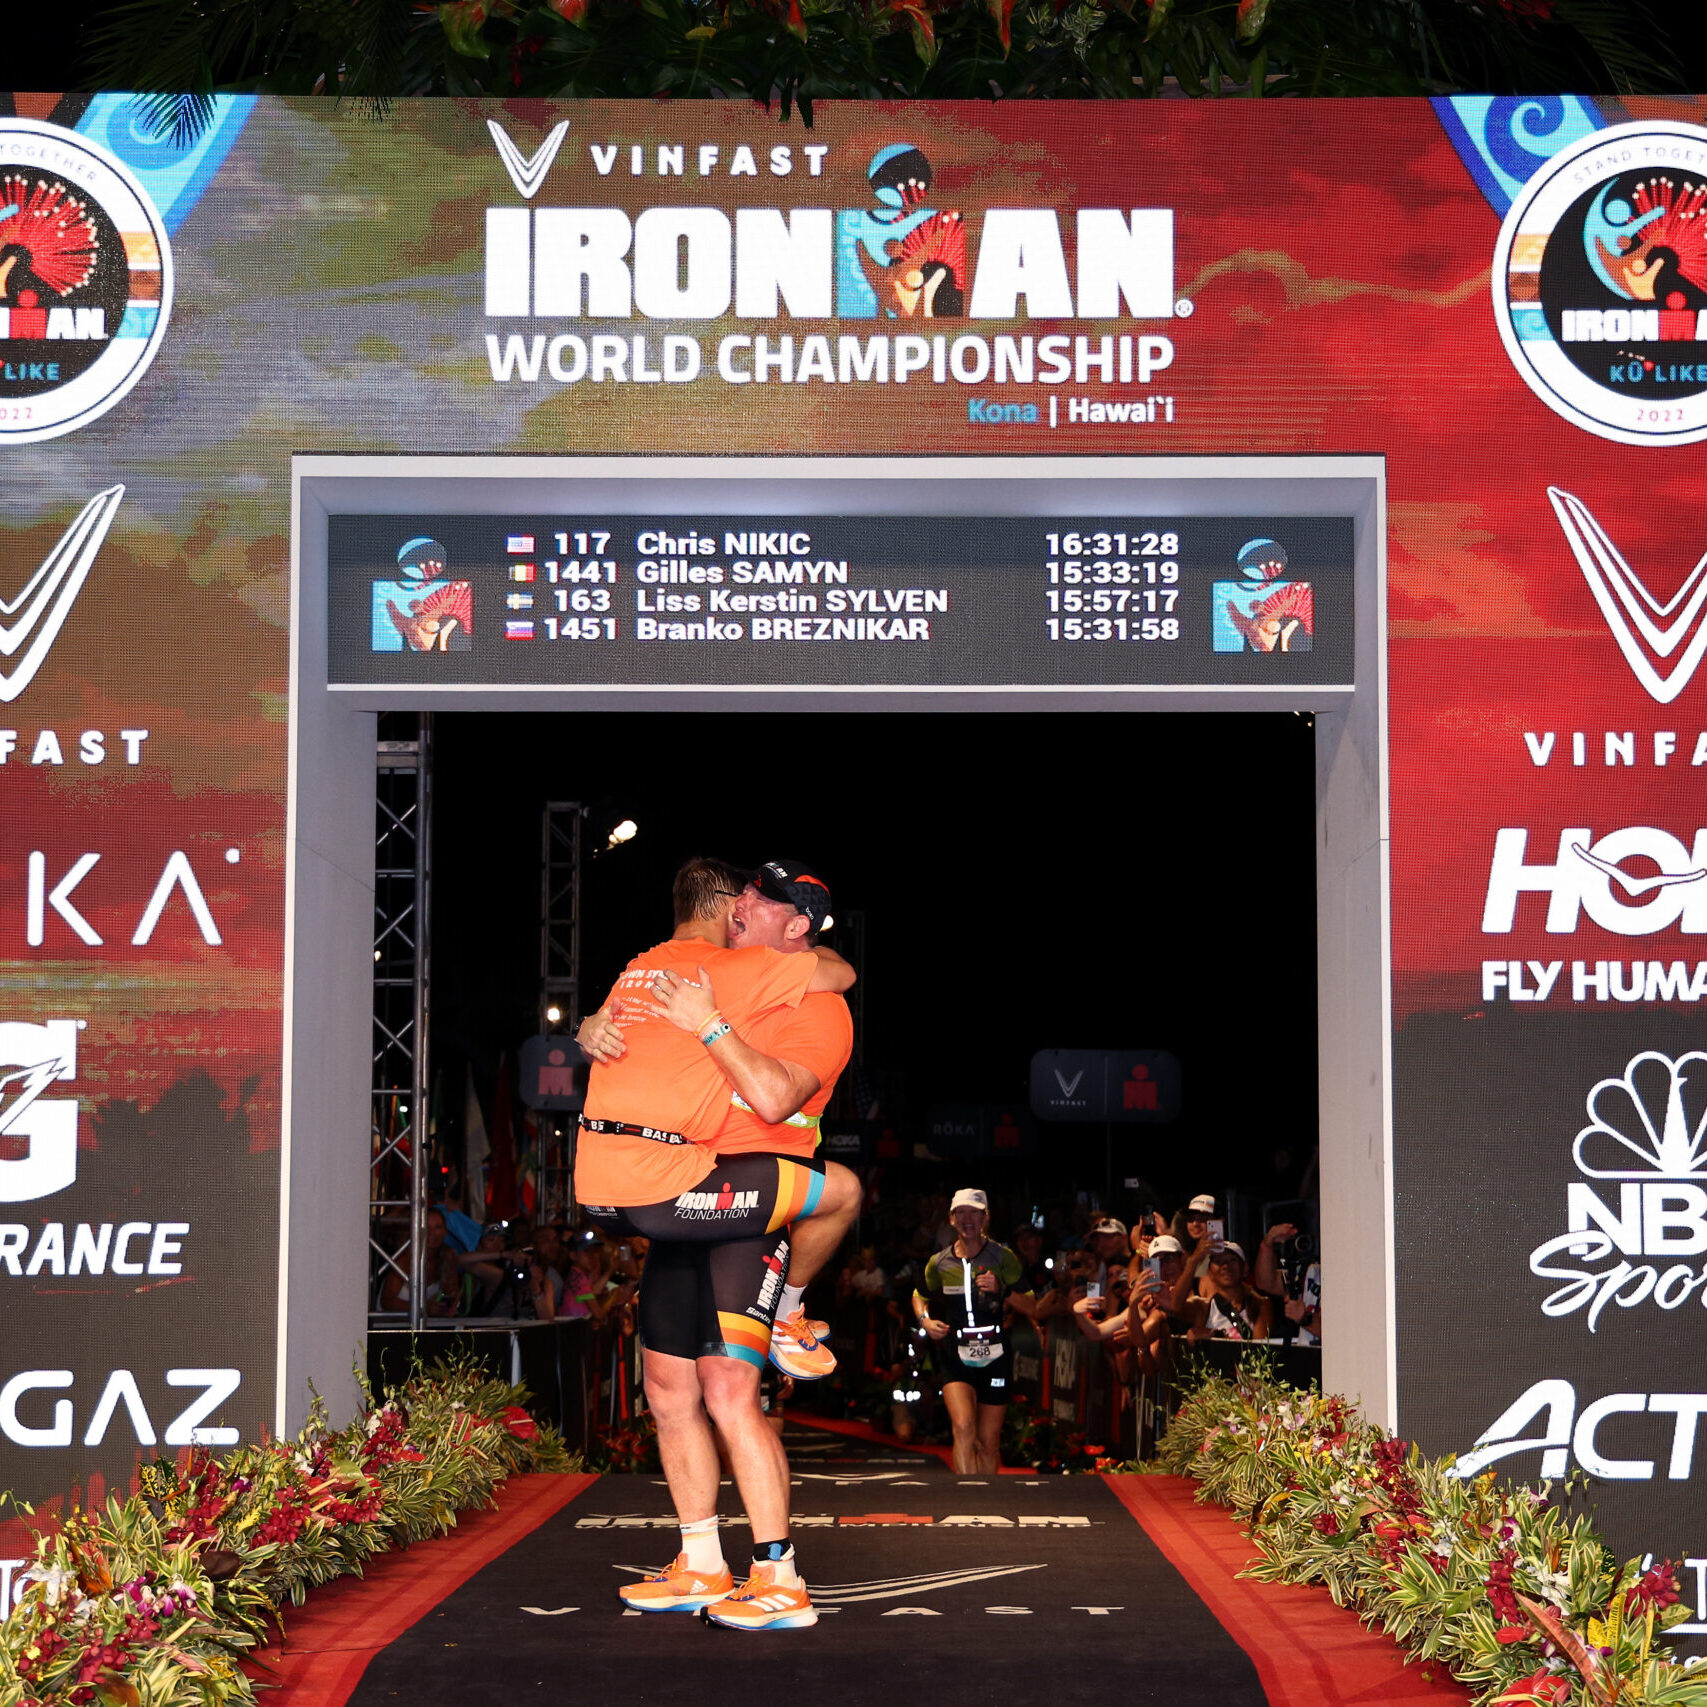 KAILUA KONA, HAWAII - OCTOBER 06: Chris Nikic and guide Dan Grieb celebrate after finishing the Ironman World Championships on October 06, 2022 in Kailua Kona, Hawaii. (Photo by Tom Pennington/Getty Images for IRONMAN)